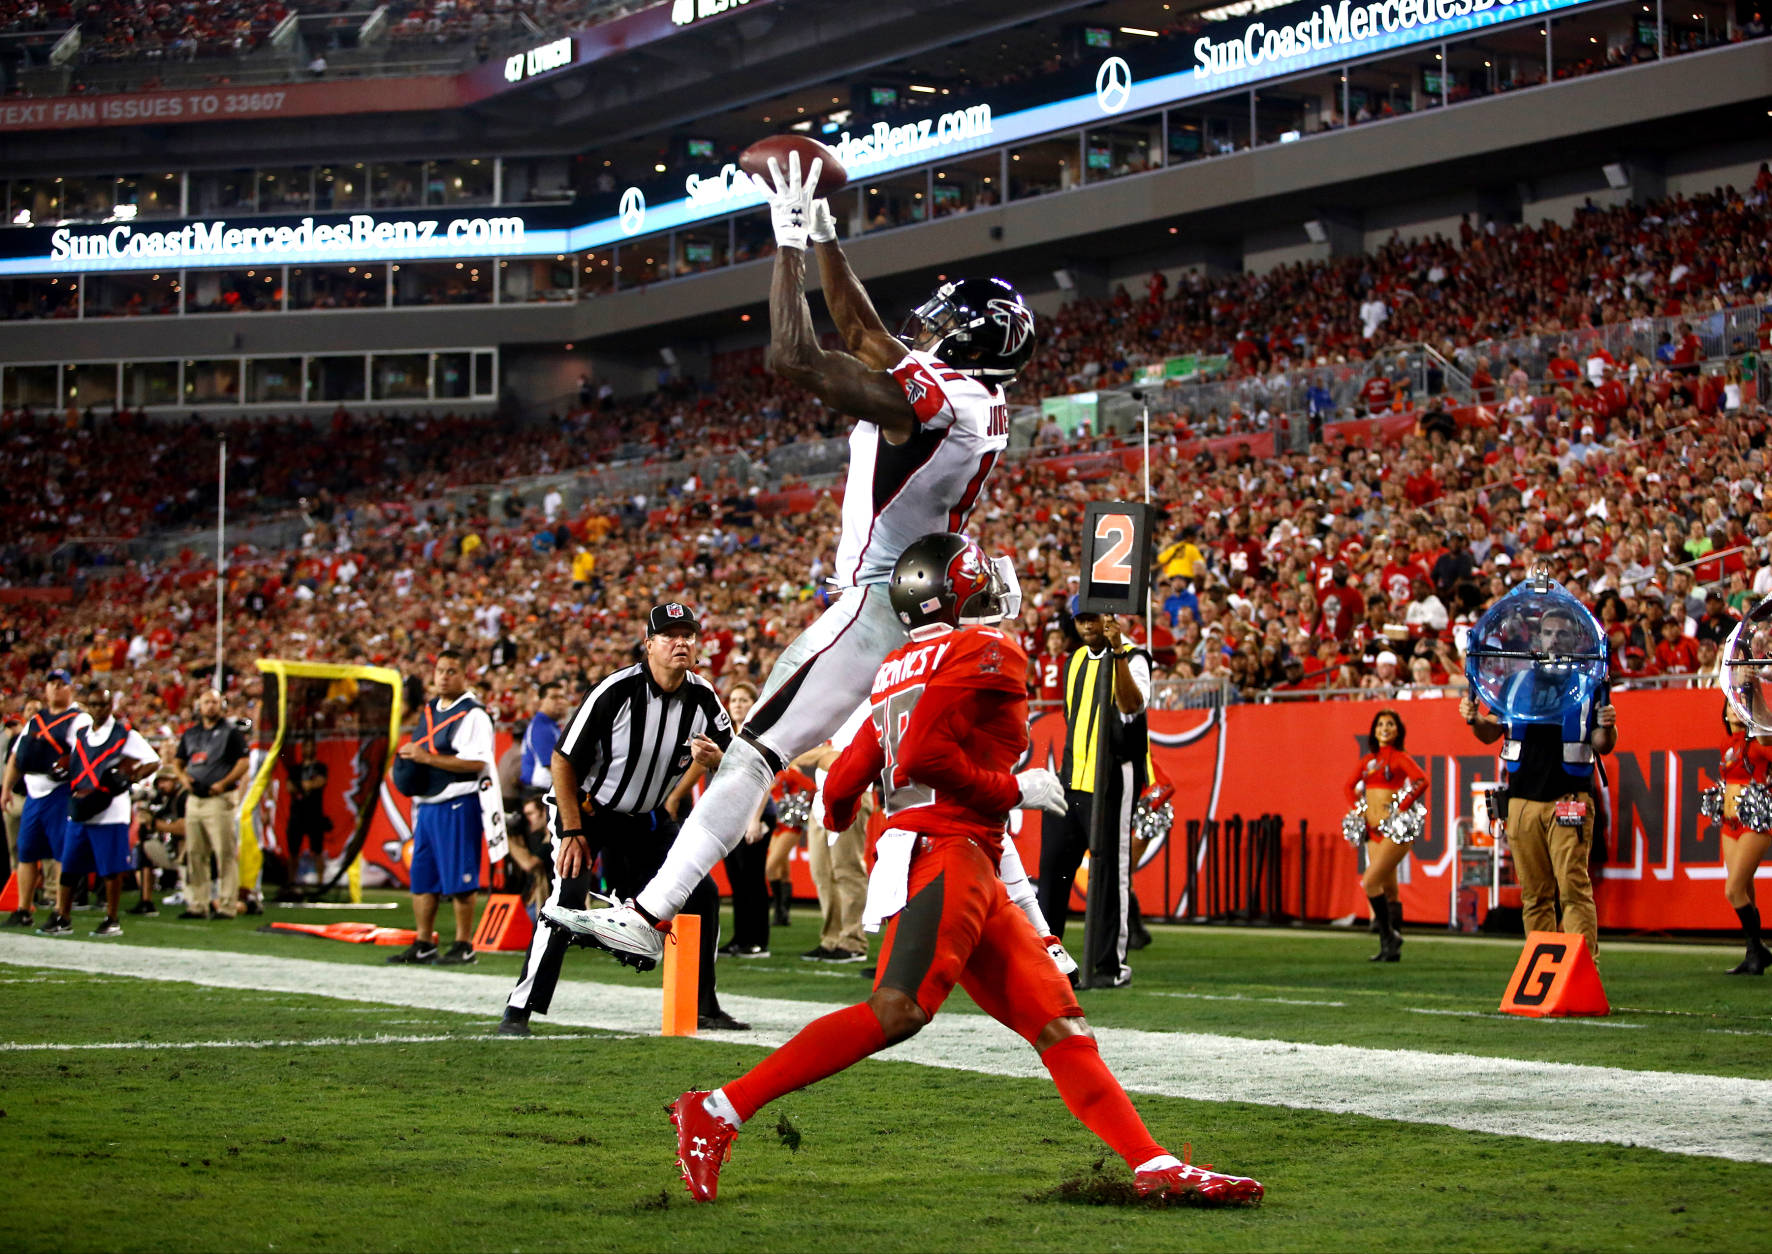 TAMPA, FL - NOVEMBER 3:  Wide receiver Julio Jones #11 of the Atlanta Falcons hauls in a 3-yard touchdown pass from quarterback Matt Ryan in front of cornerback Vernon Hargreaves #28 of the Tampa Bay Buccaneers during the third quarter of an NFL game on November 3, 2016 at Raymond James Stadium in Tampa, Florida. (Photo by Brian Blanco/Getty Images)